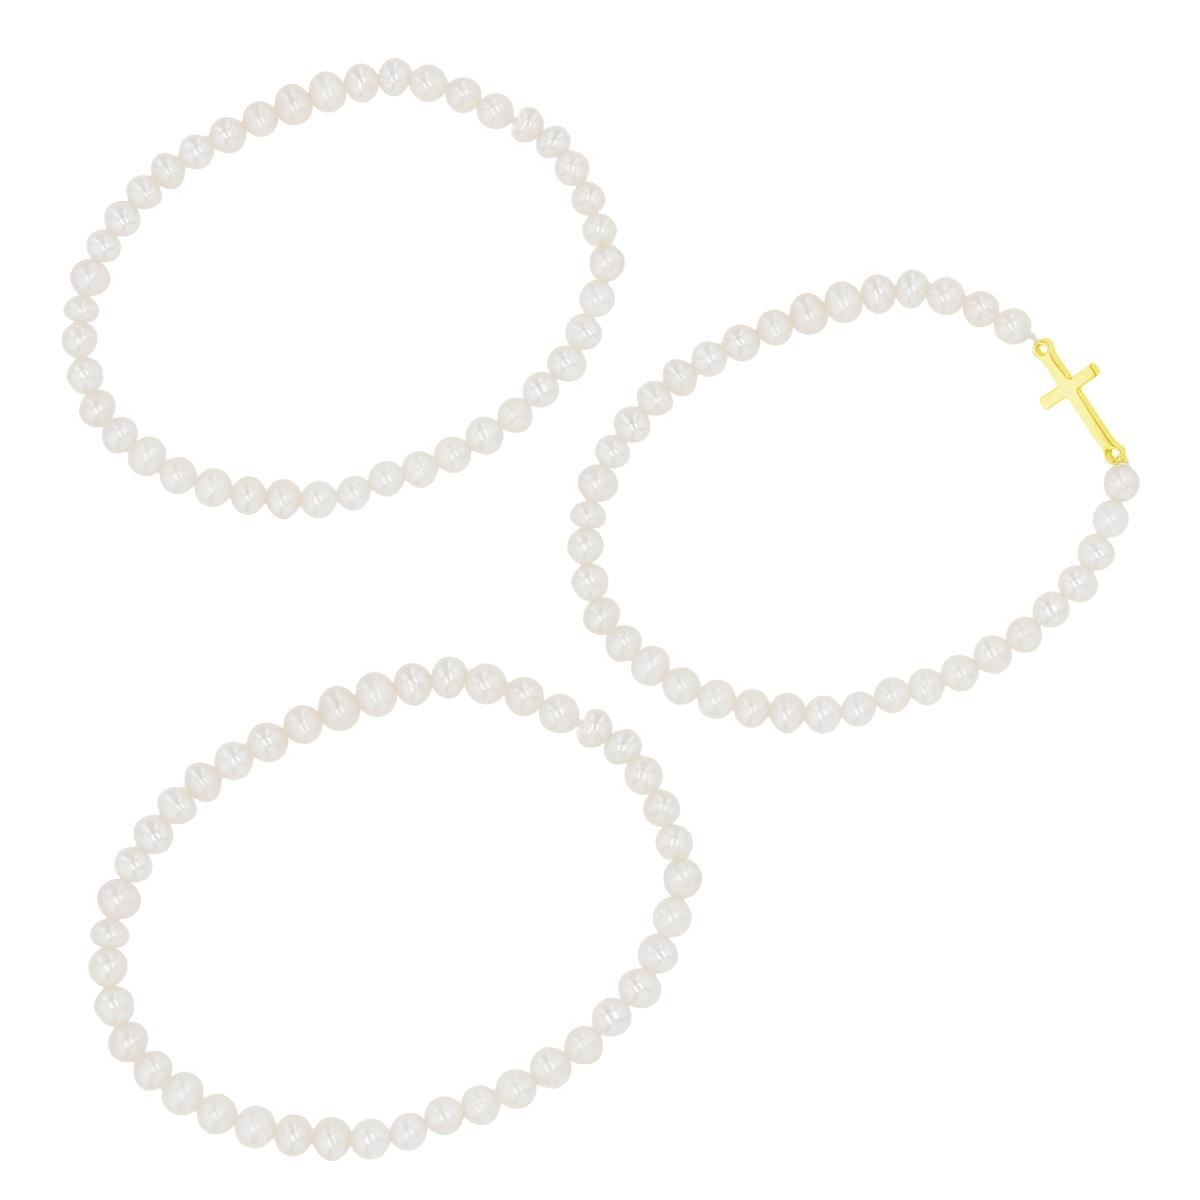 Sterling Silver Yellow 1-Micron 4-5mm Simulated Pearls Cross Stretch & Plain FWP Stretch Set of 3 Bracelet